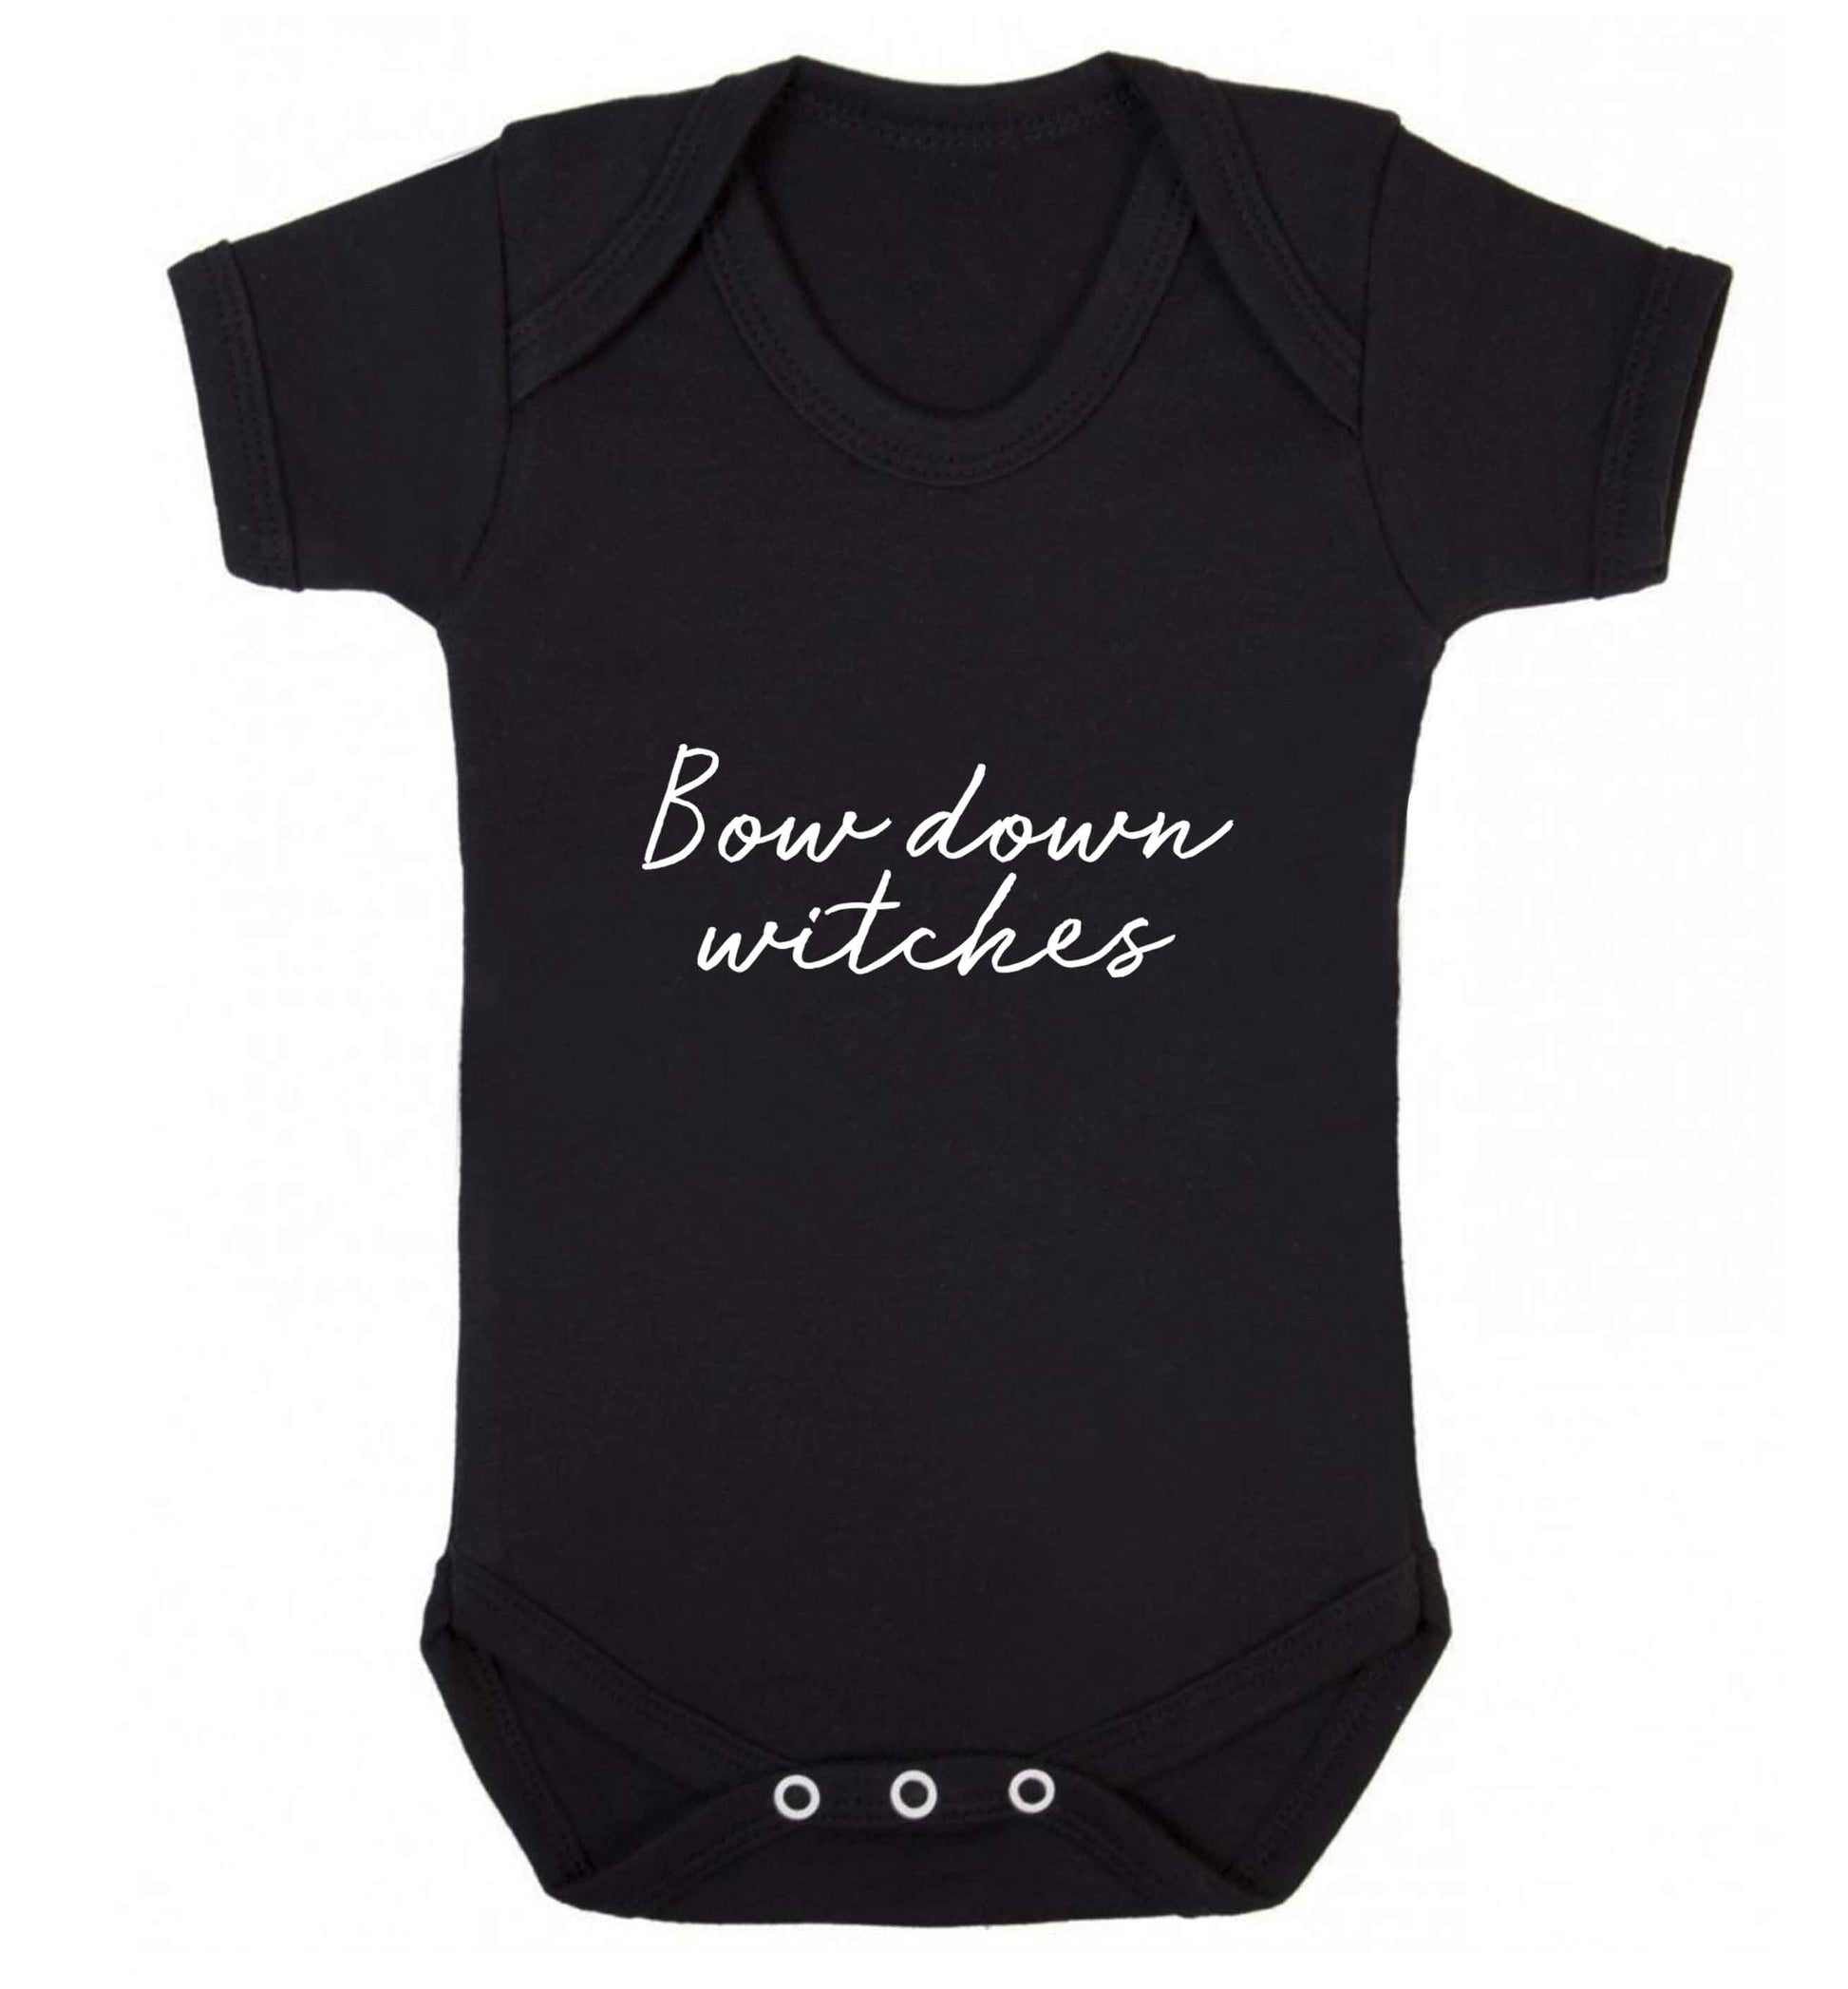 Bow down witches baby vest black 18-24 months